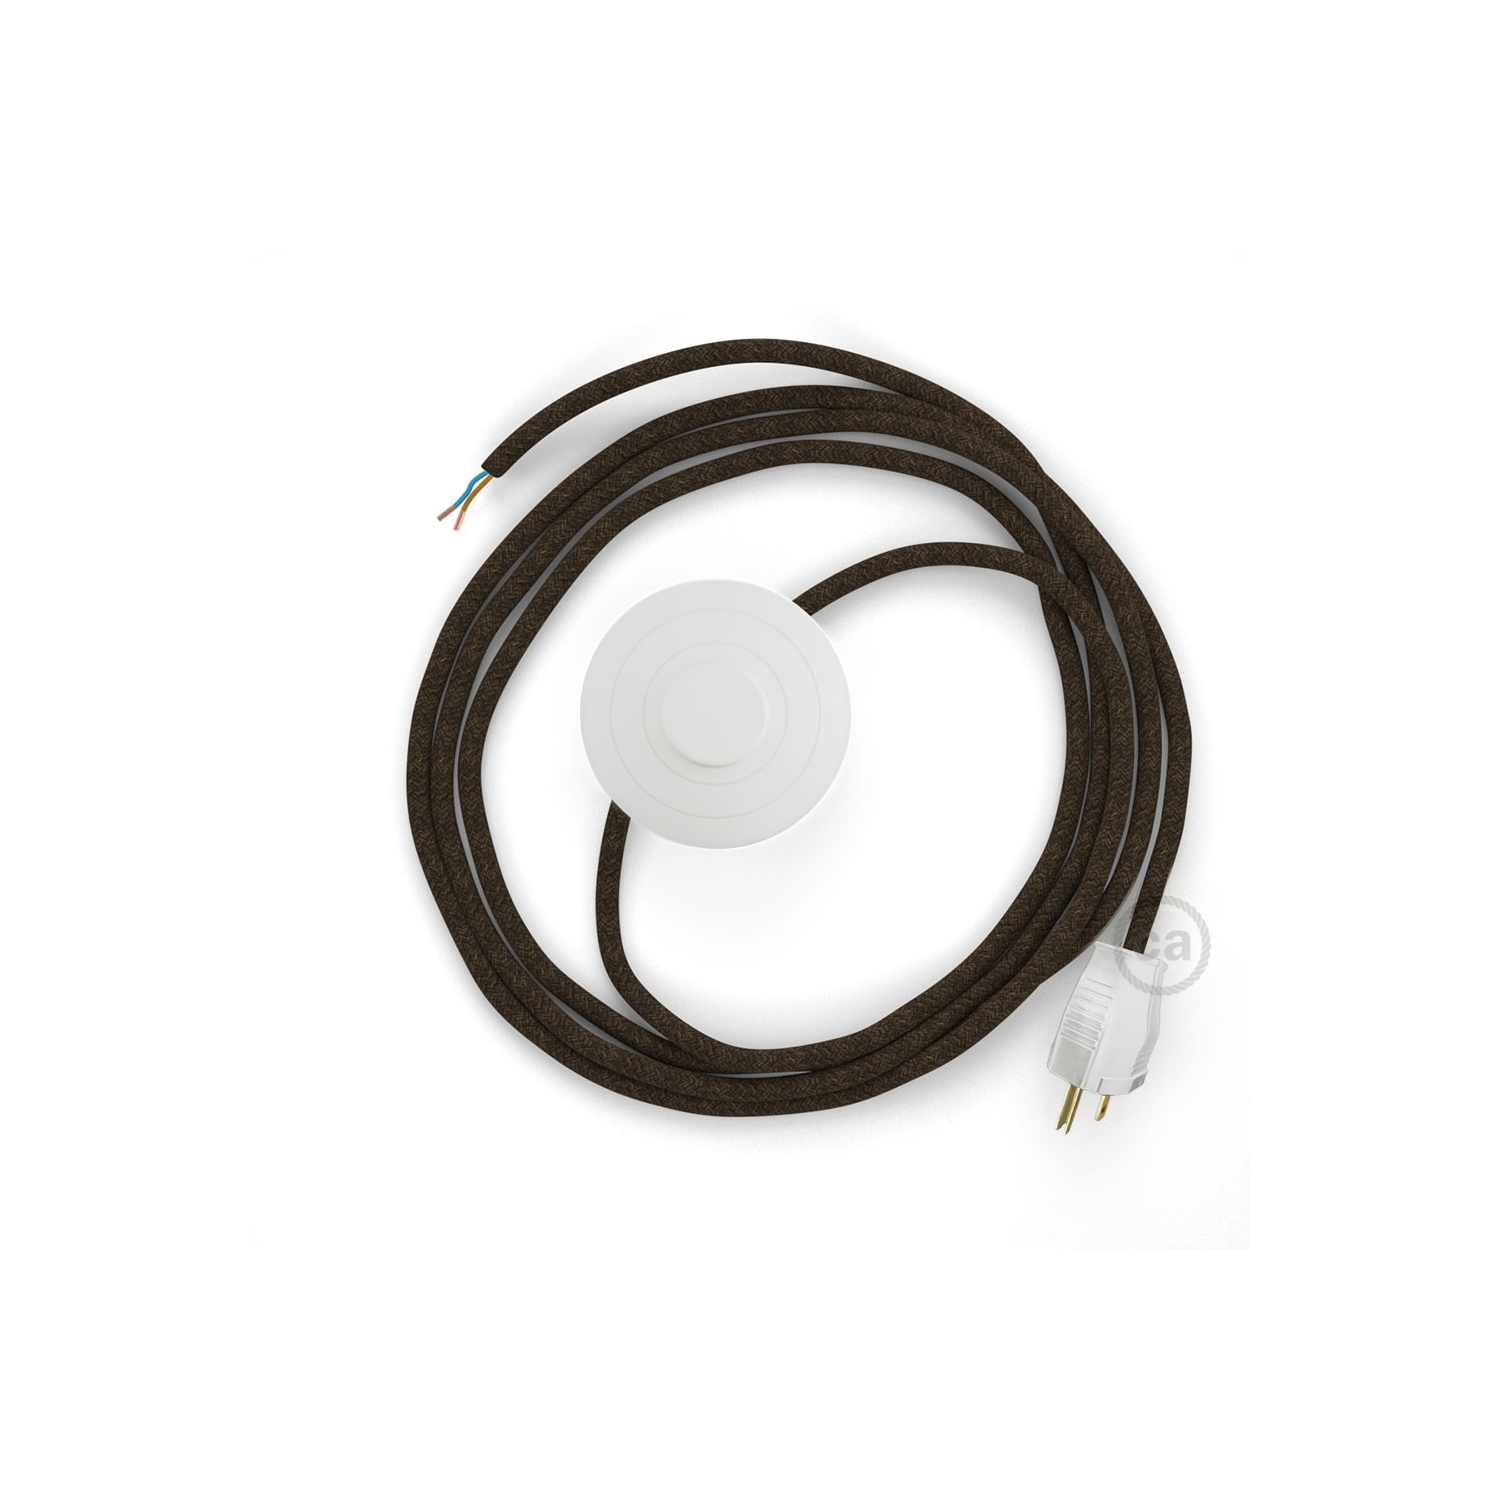 Power Cord with foot switch, RN04 Brown Linen - Choose color of switch/plug